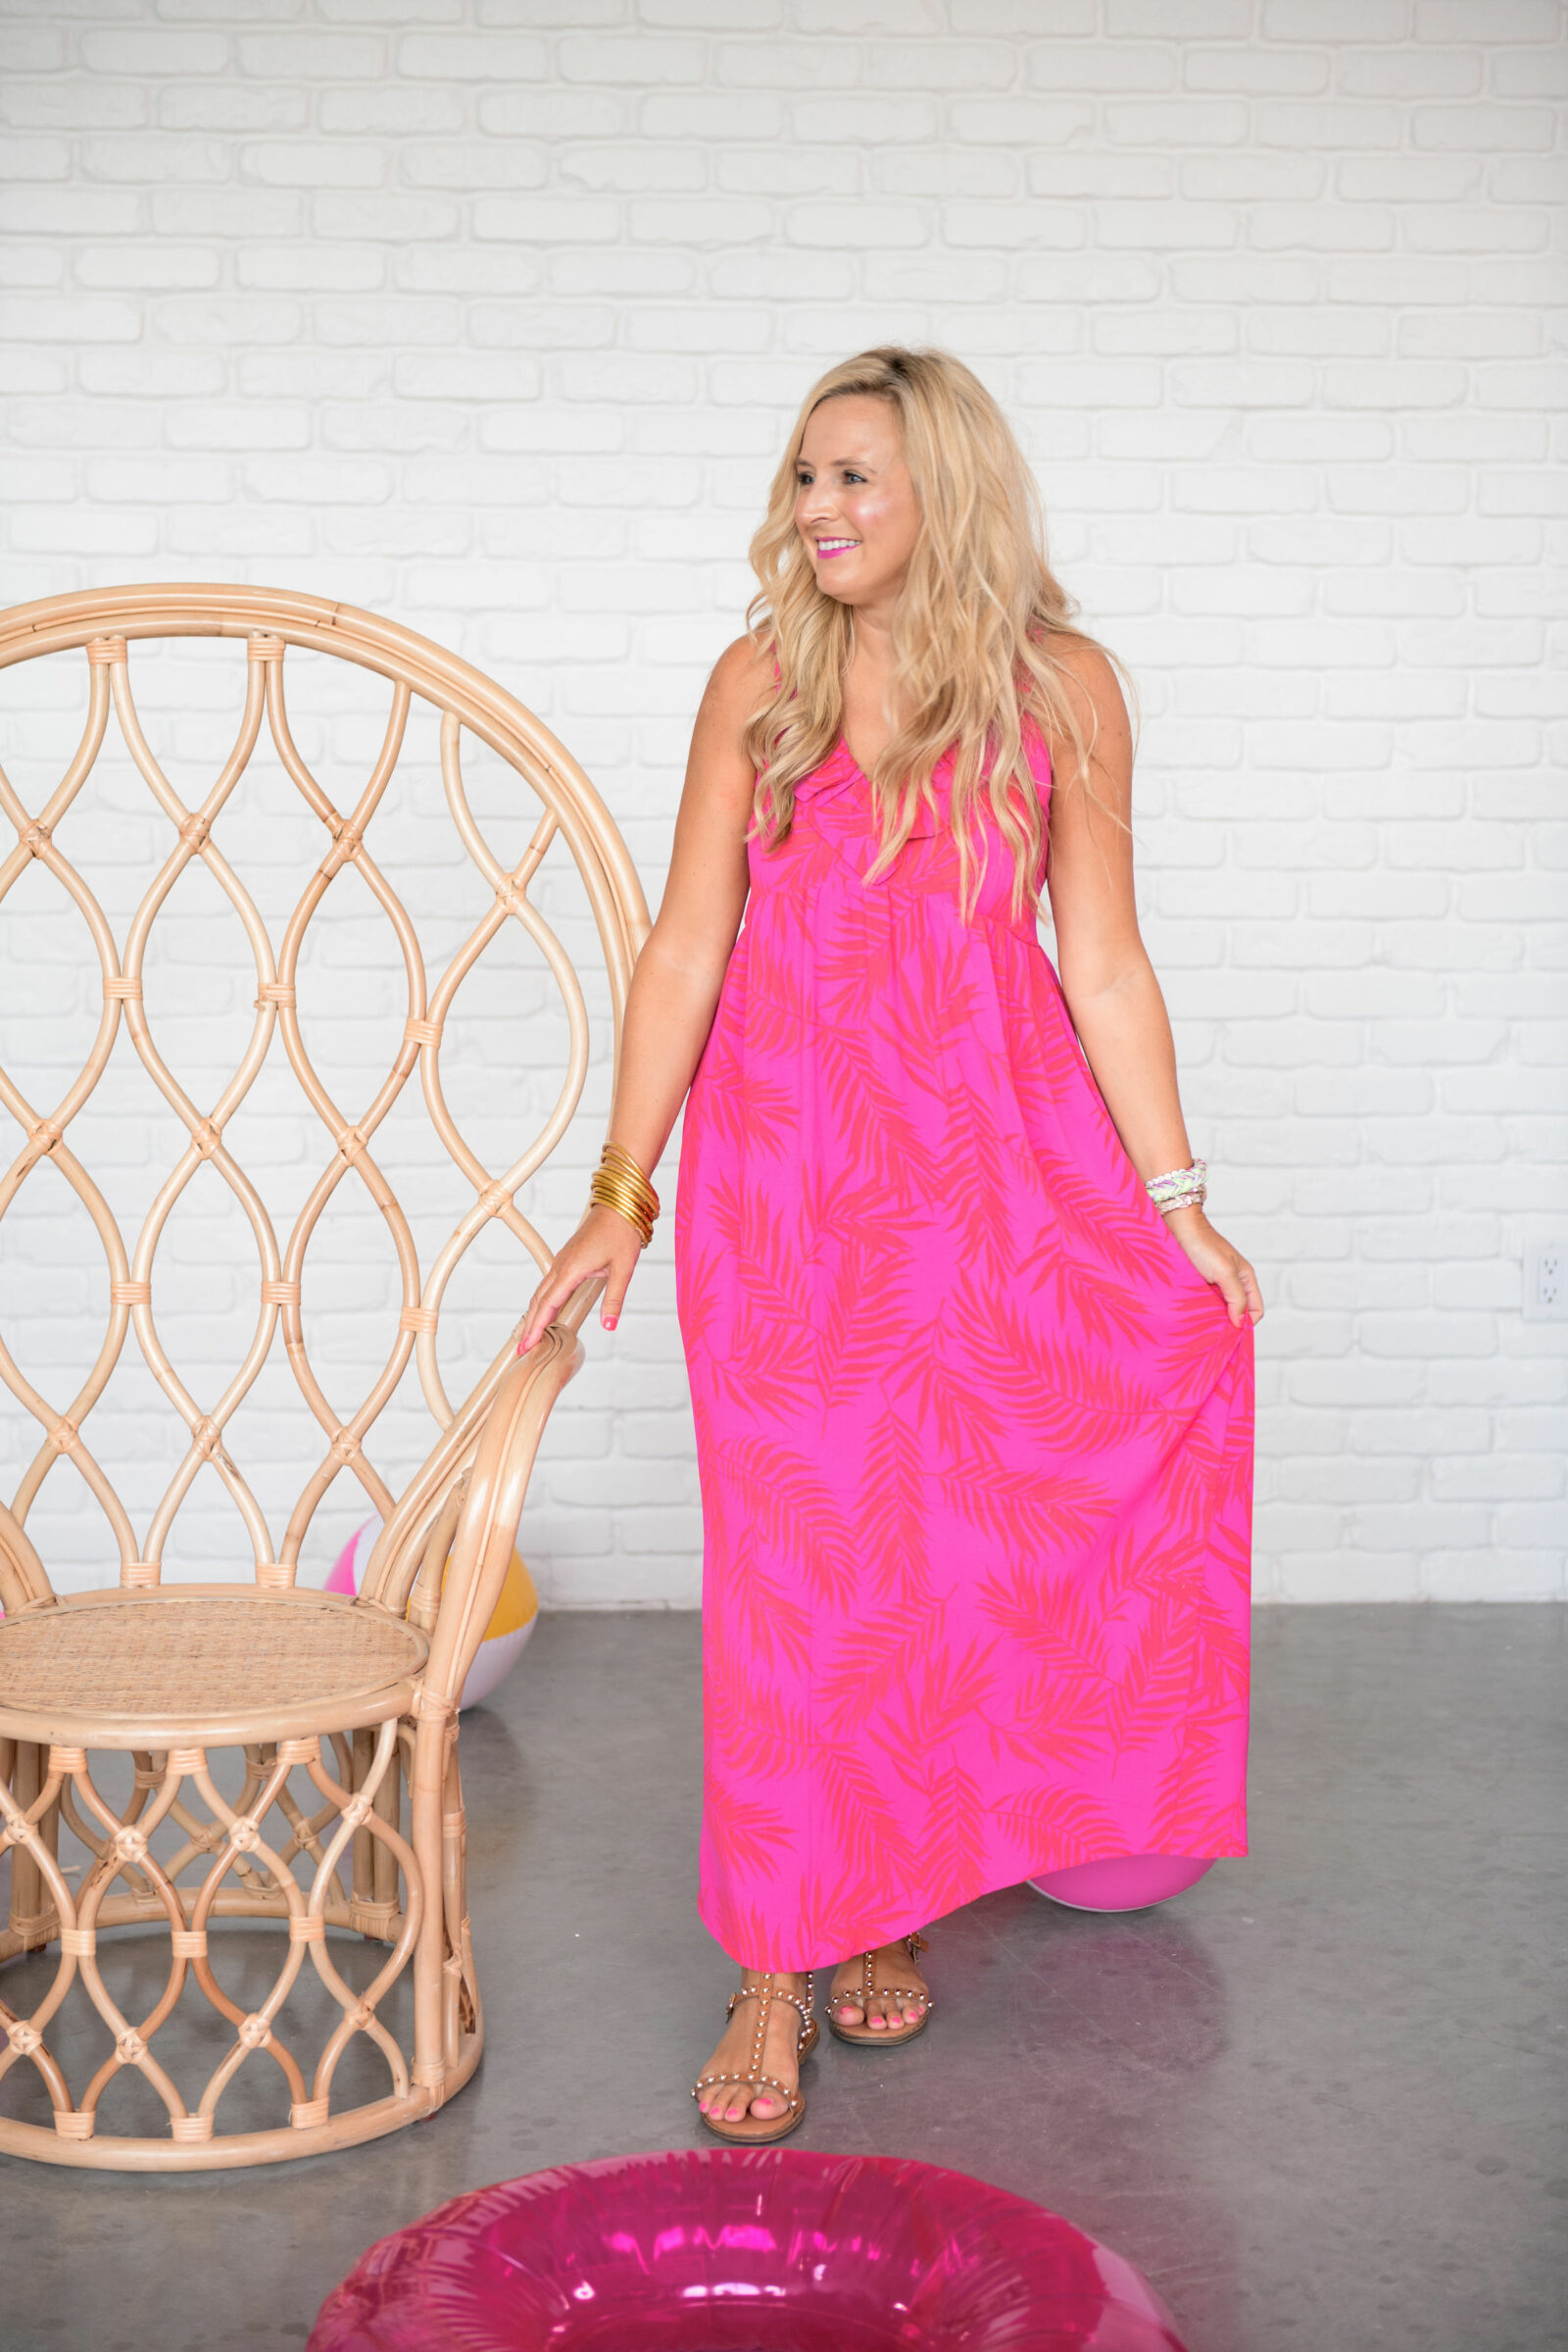 Summer Clothing from Gibson Look by popular Houston fashion blog, The House of Fancy: image of a woman standing next to a bamboo peacock chair and wearing a pink and red tropical print maxi dress with brown studded sandals.  